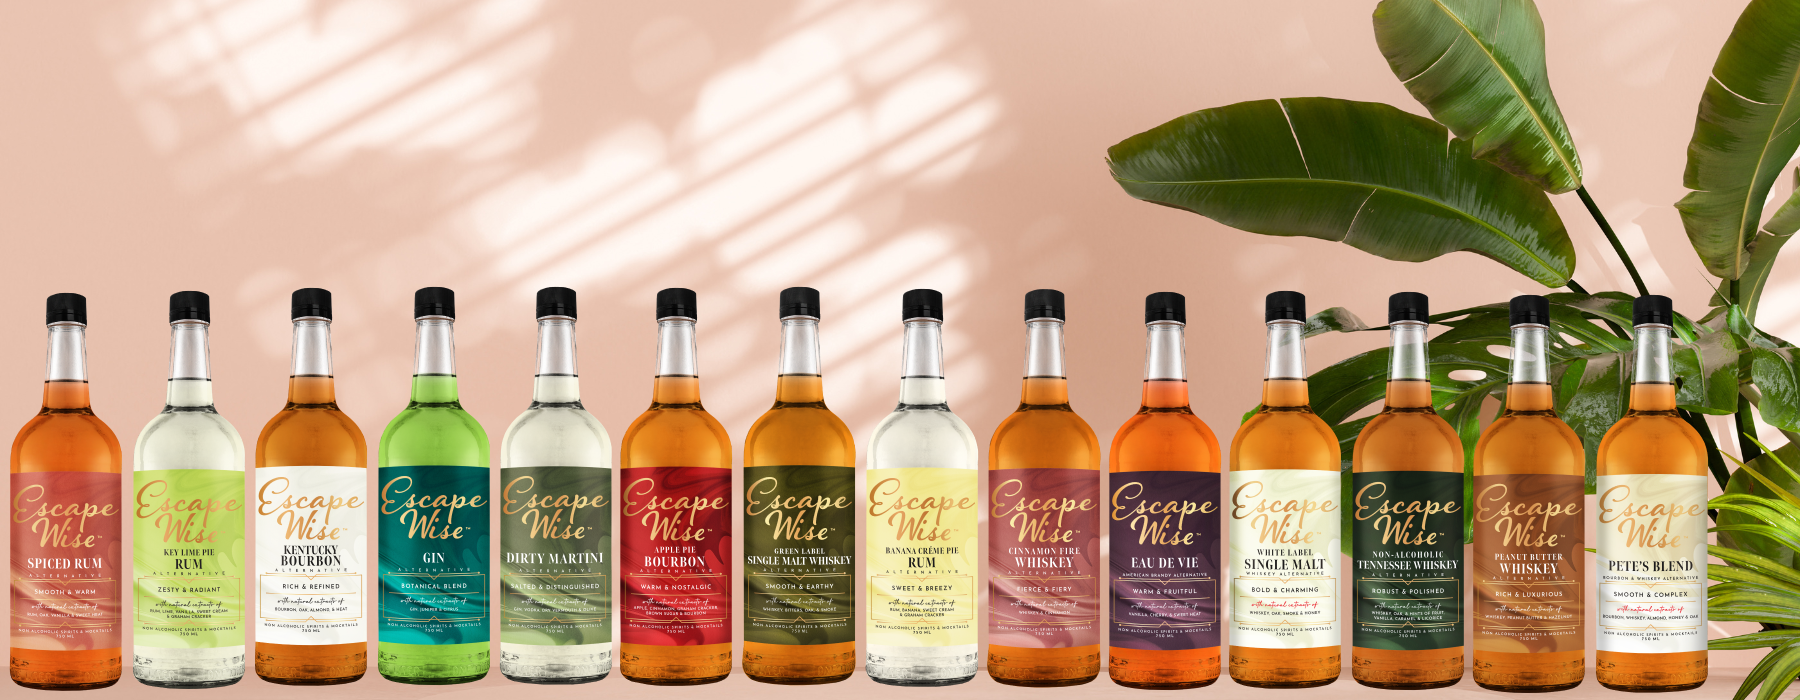 Non-Alcoholic Spirits and Alcohol Free Spirits by Escape Wise Mocktails